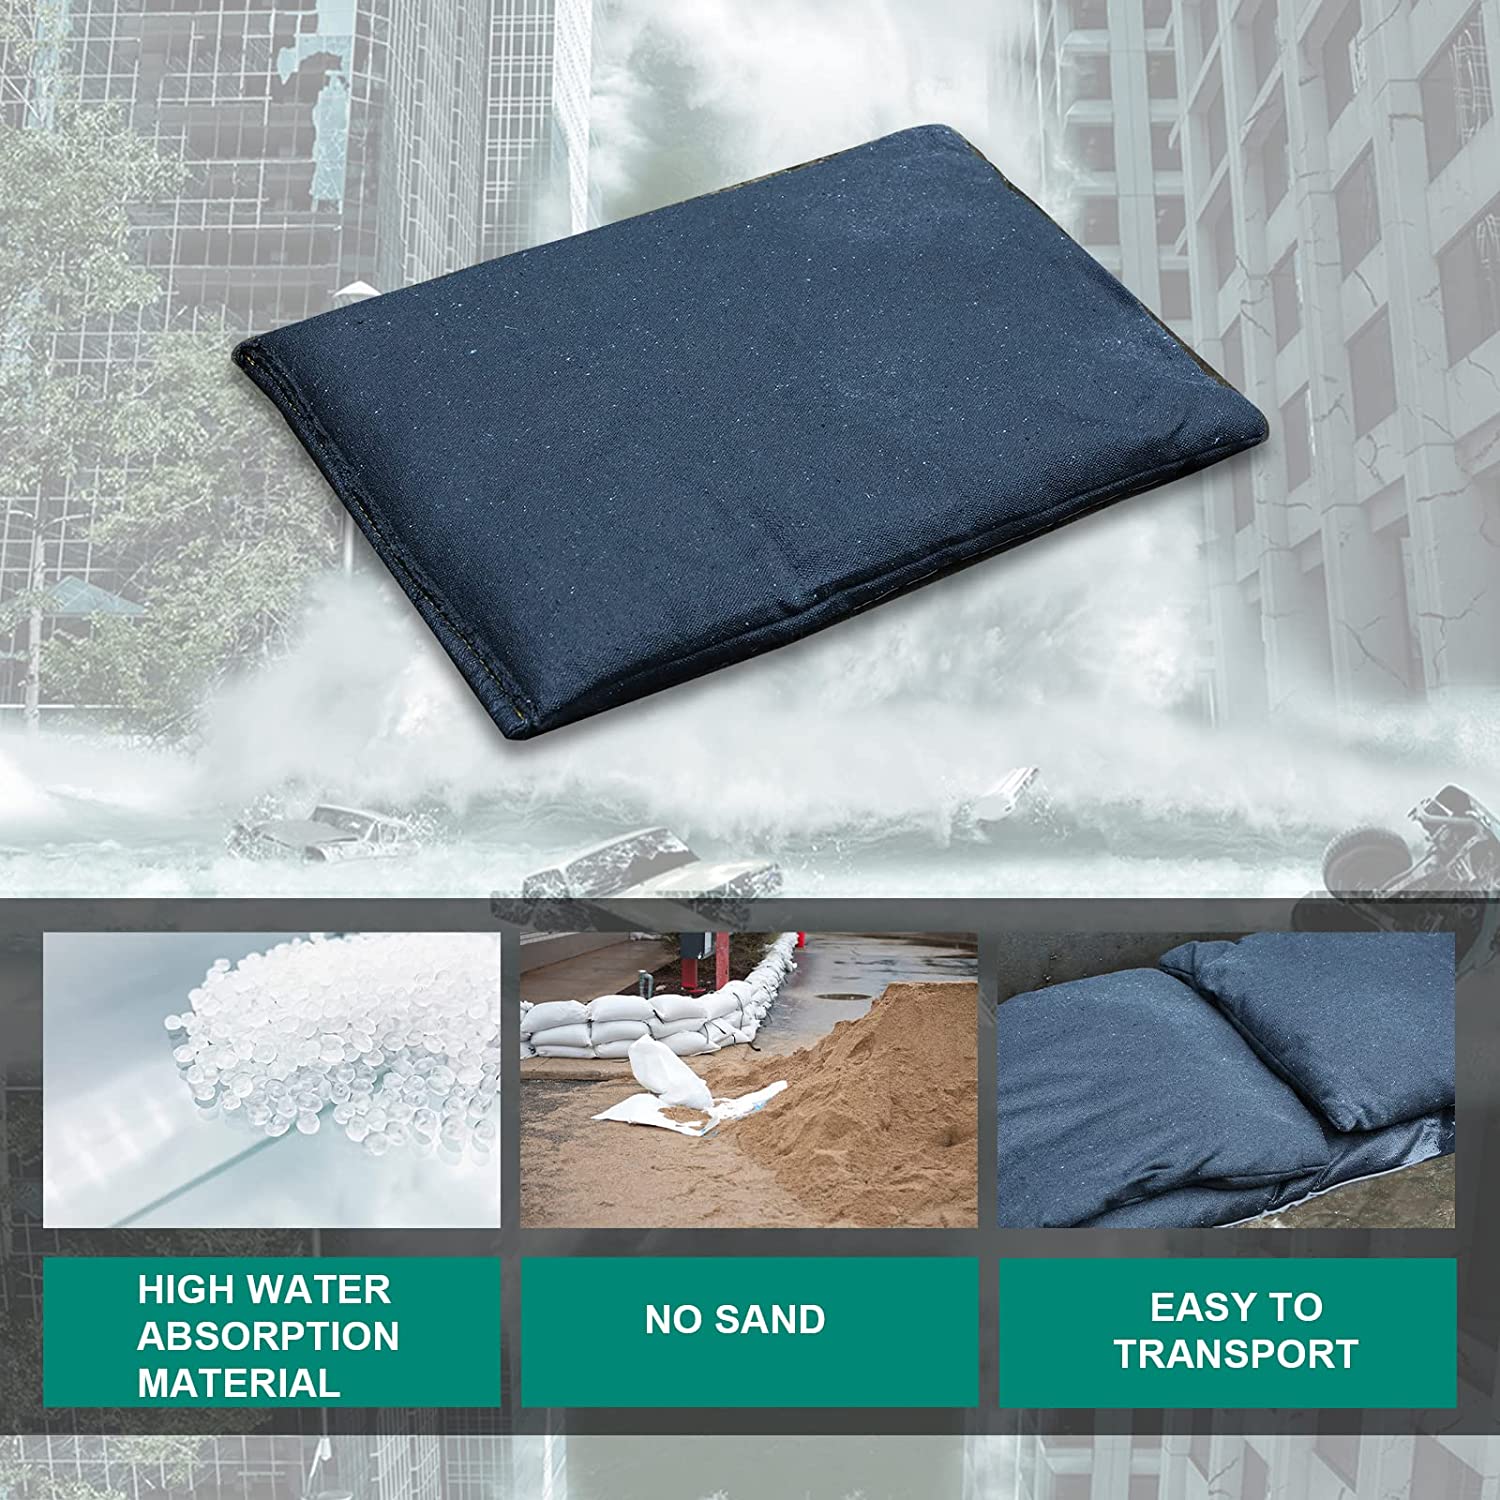 Sandless Self-Inflating Flood Prevention Barriers Reusable Sand Bags